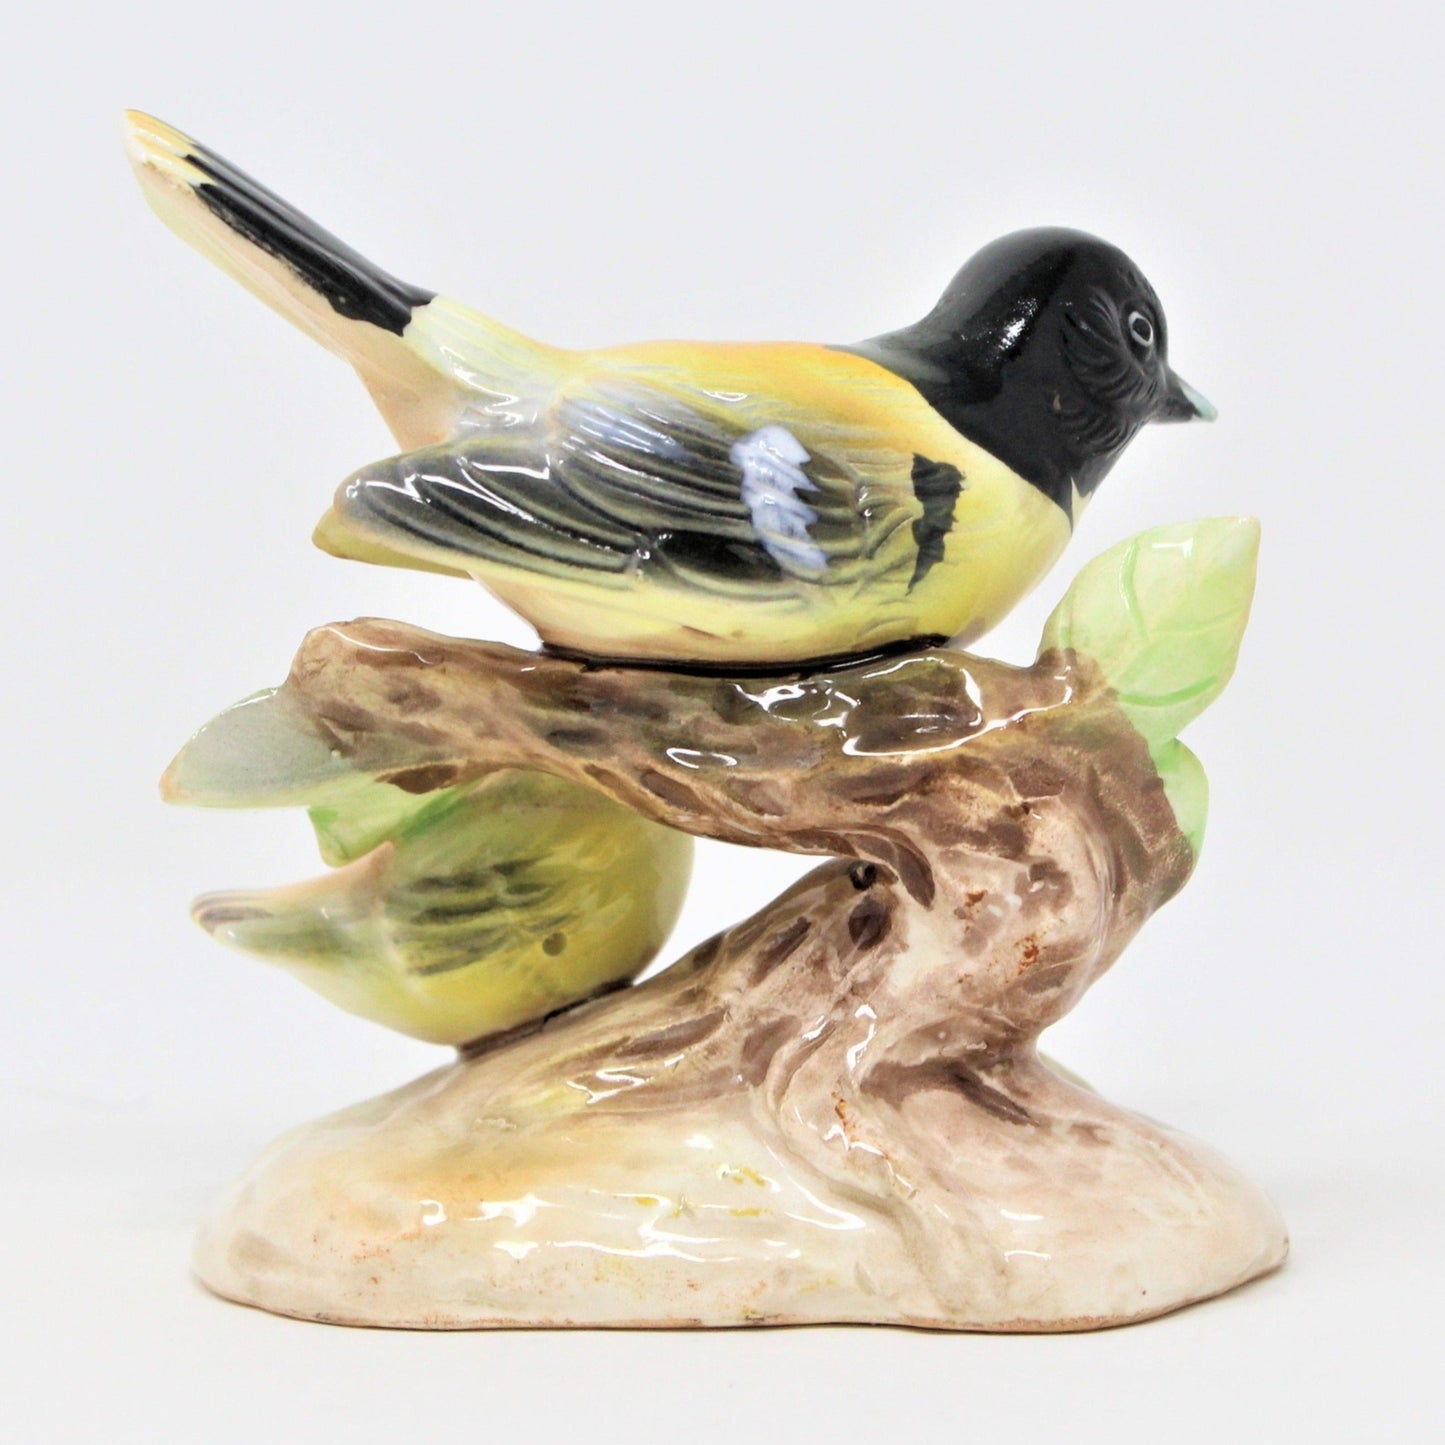 Figurine, Arnart, Oriole with Chick, Hand Painted, Vintage